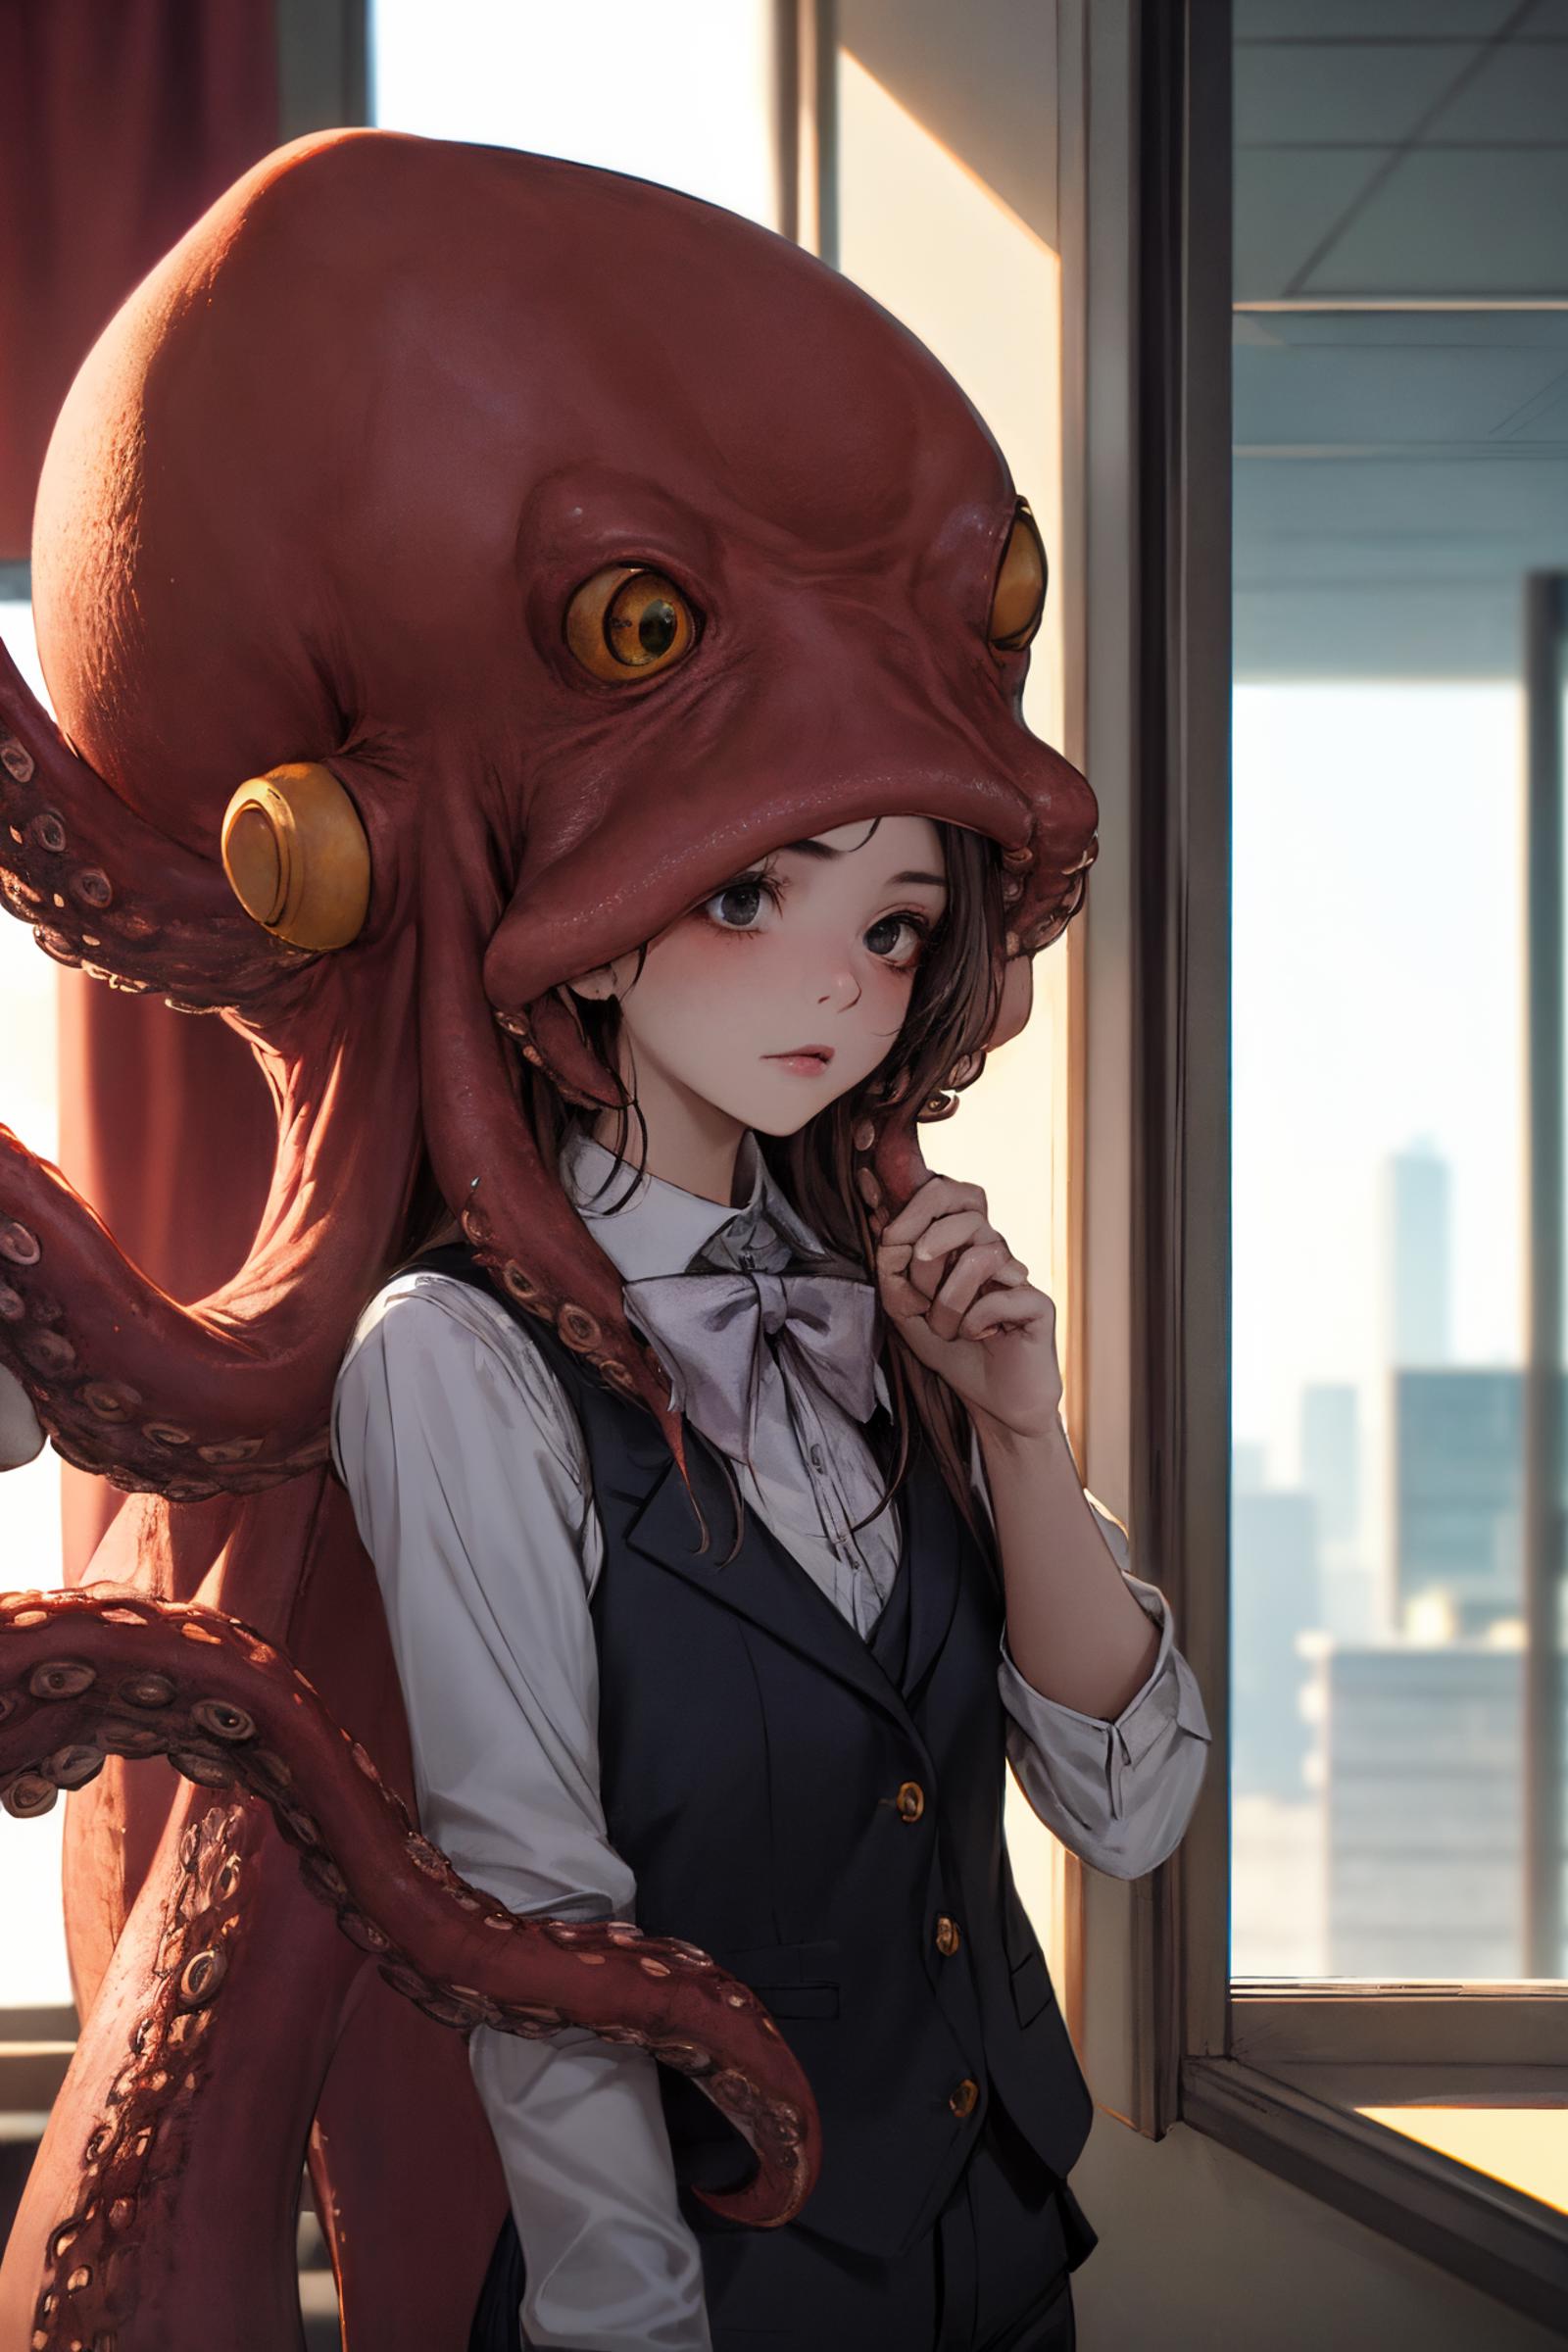 A girl with an octopus head on her head.